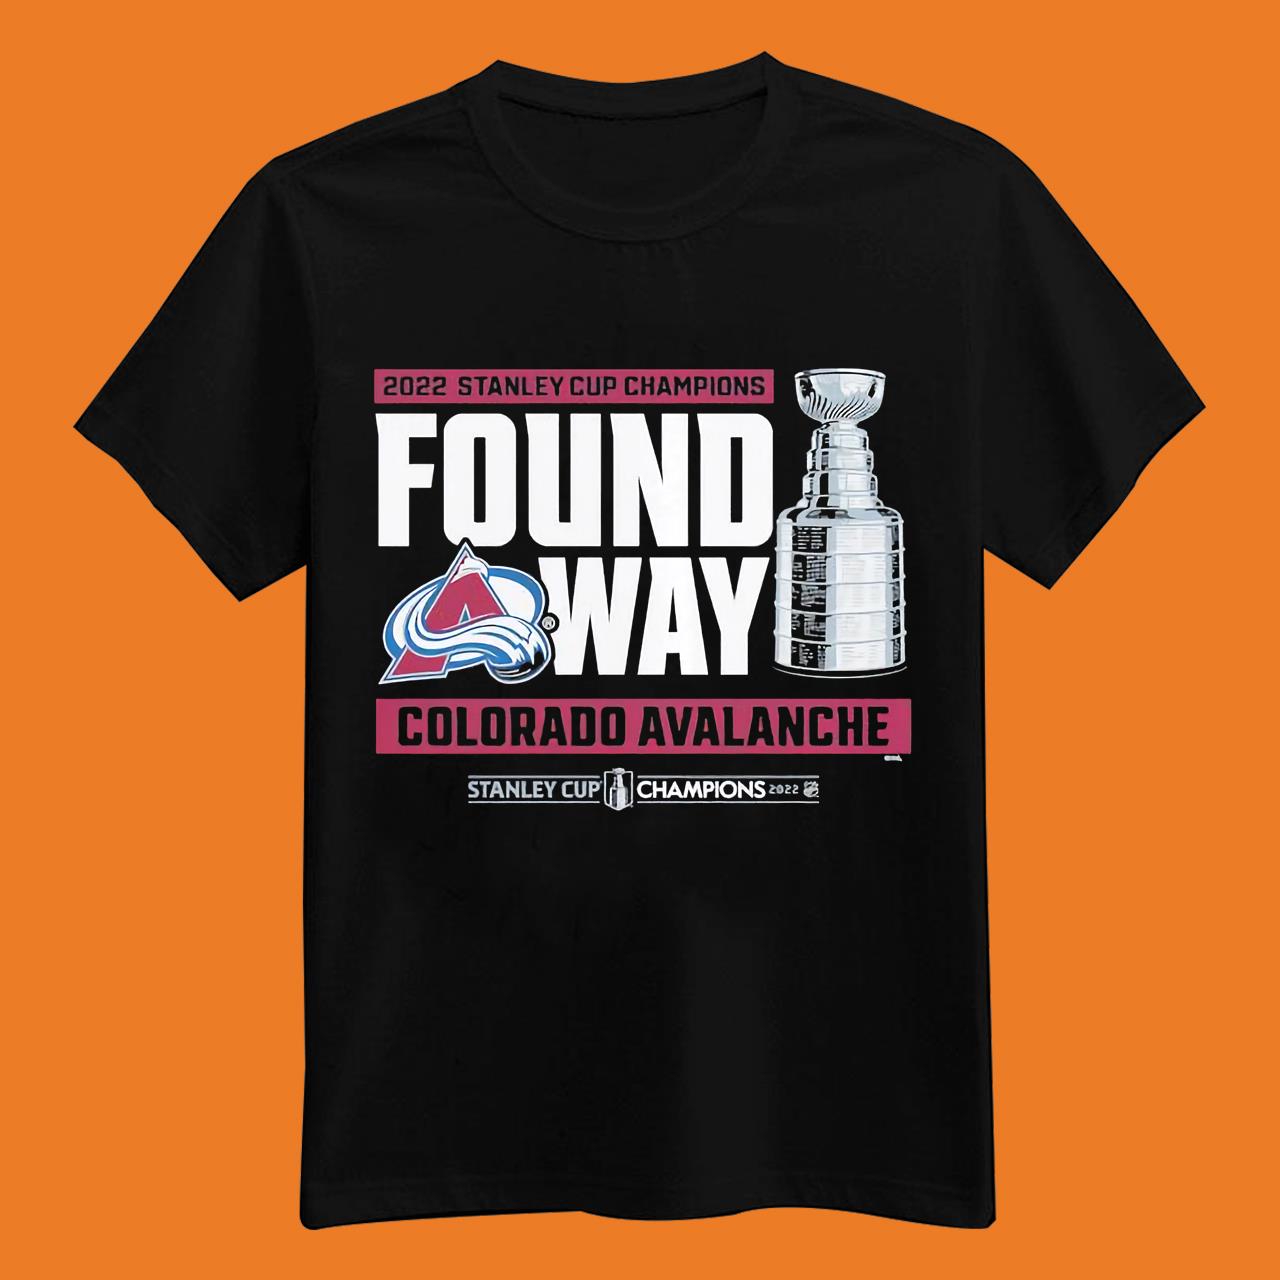 Premium Colorado Avalanche 2022 Stanley Cup Champions Found A Way T-shirt